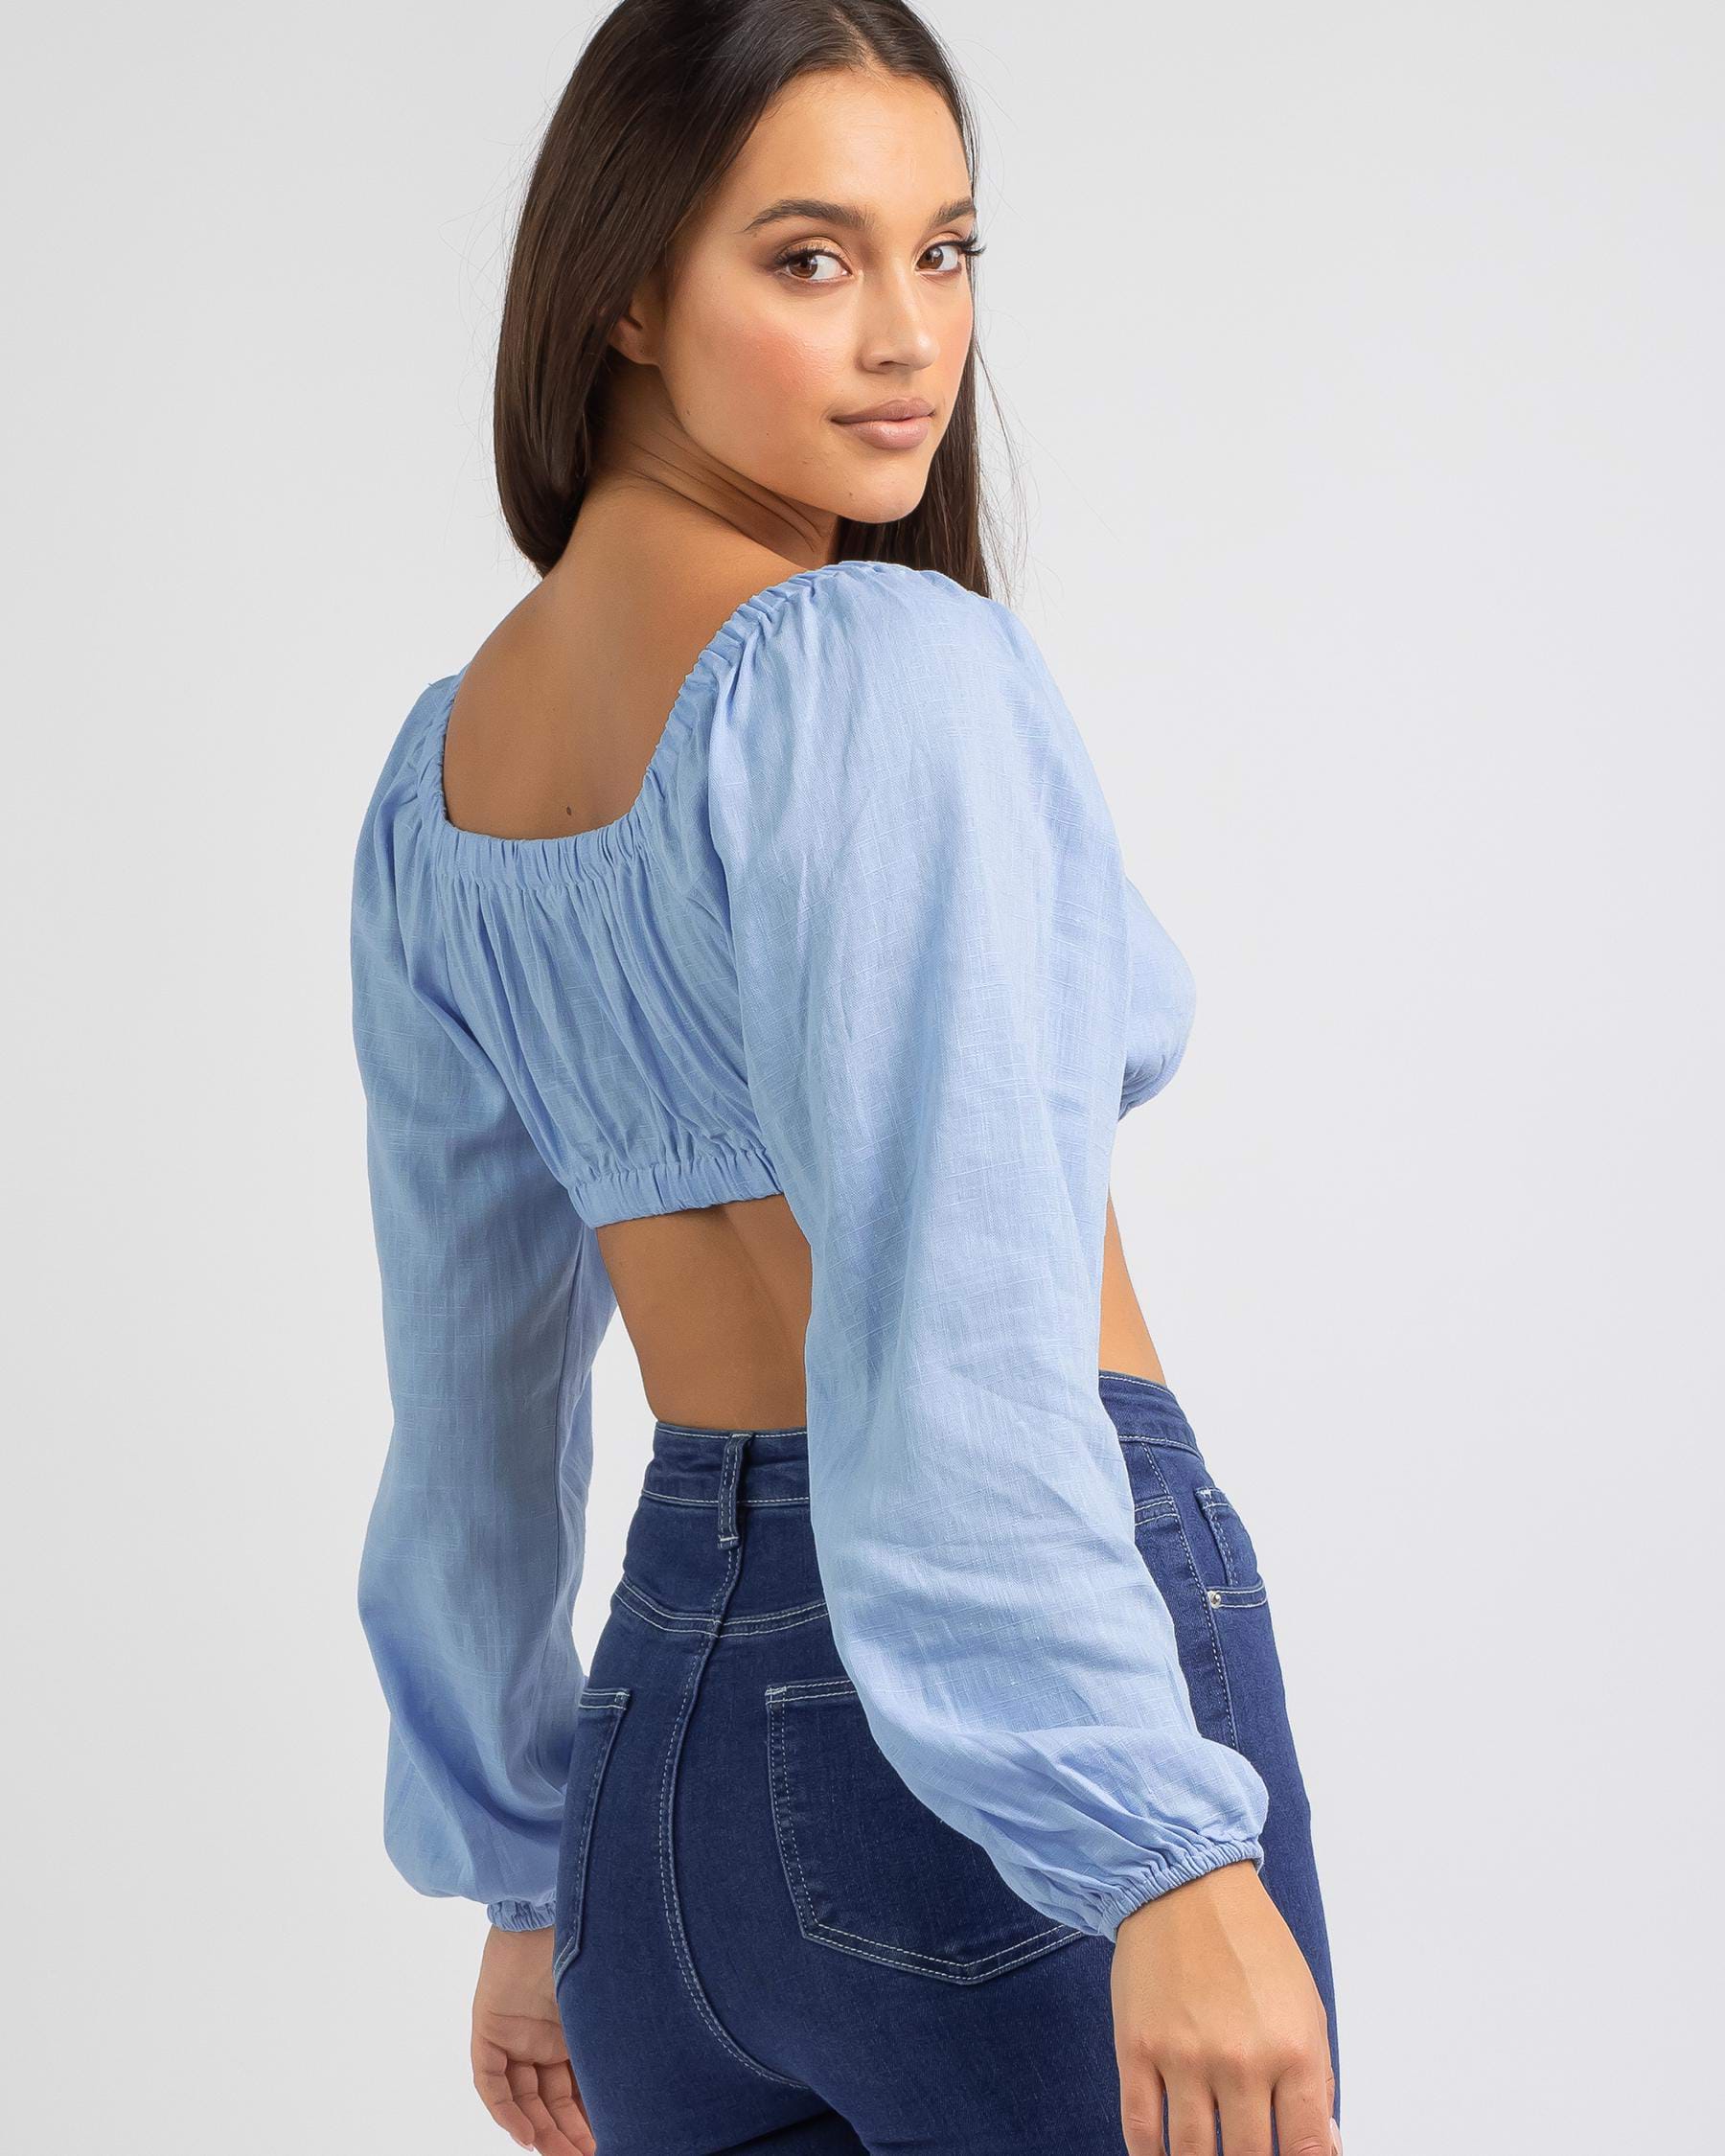 Ava And Ever Indigo Top In Light Blue - Fast Shipping & Easy Returns ...